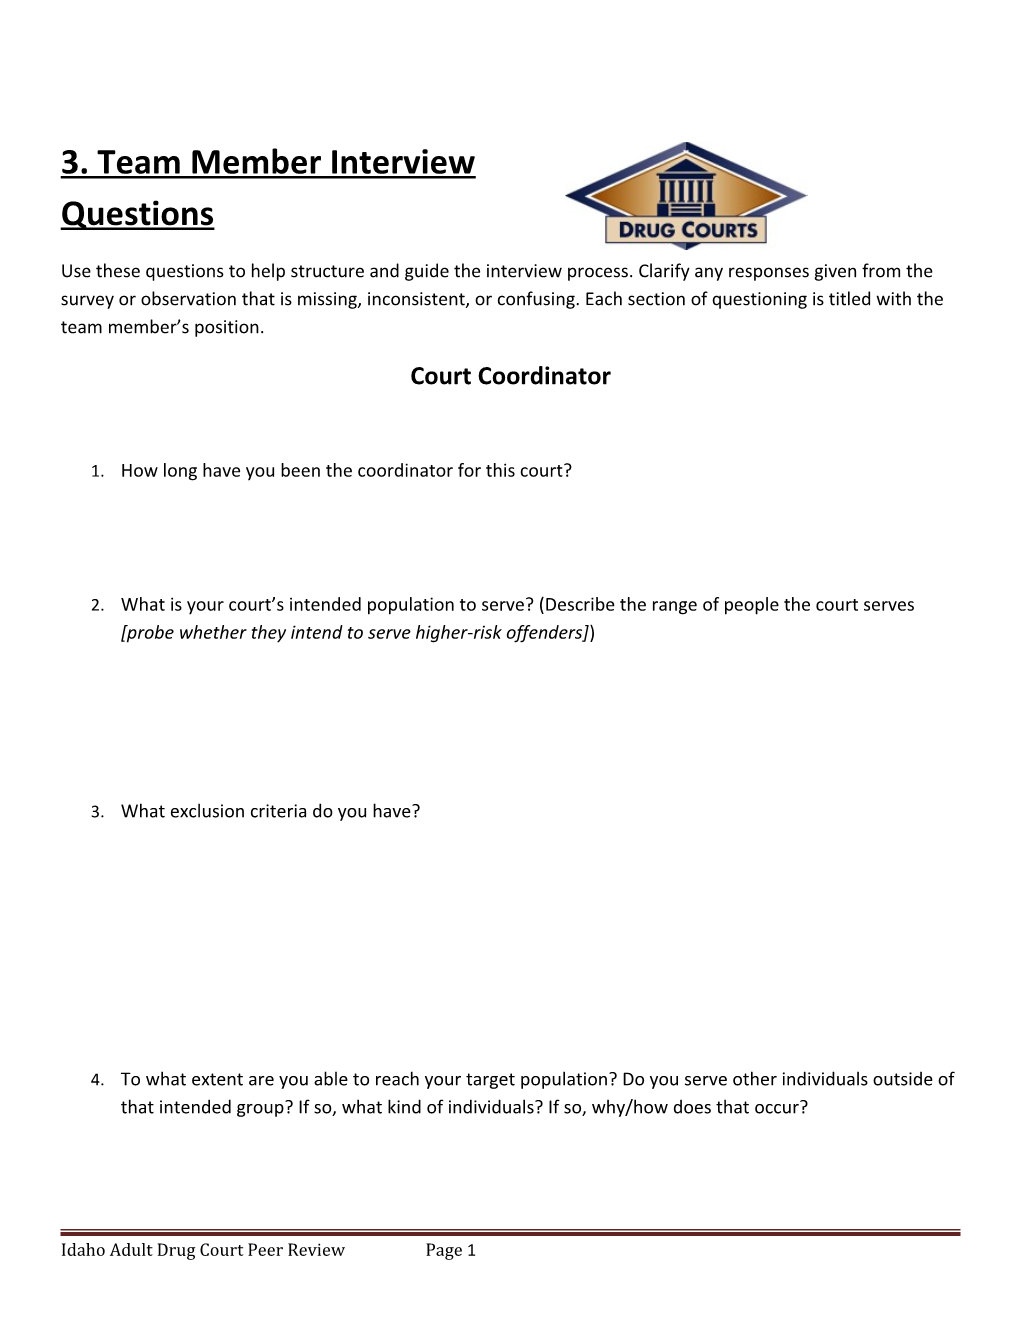 3. Team Member Interview Questions